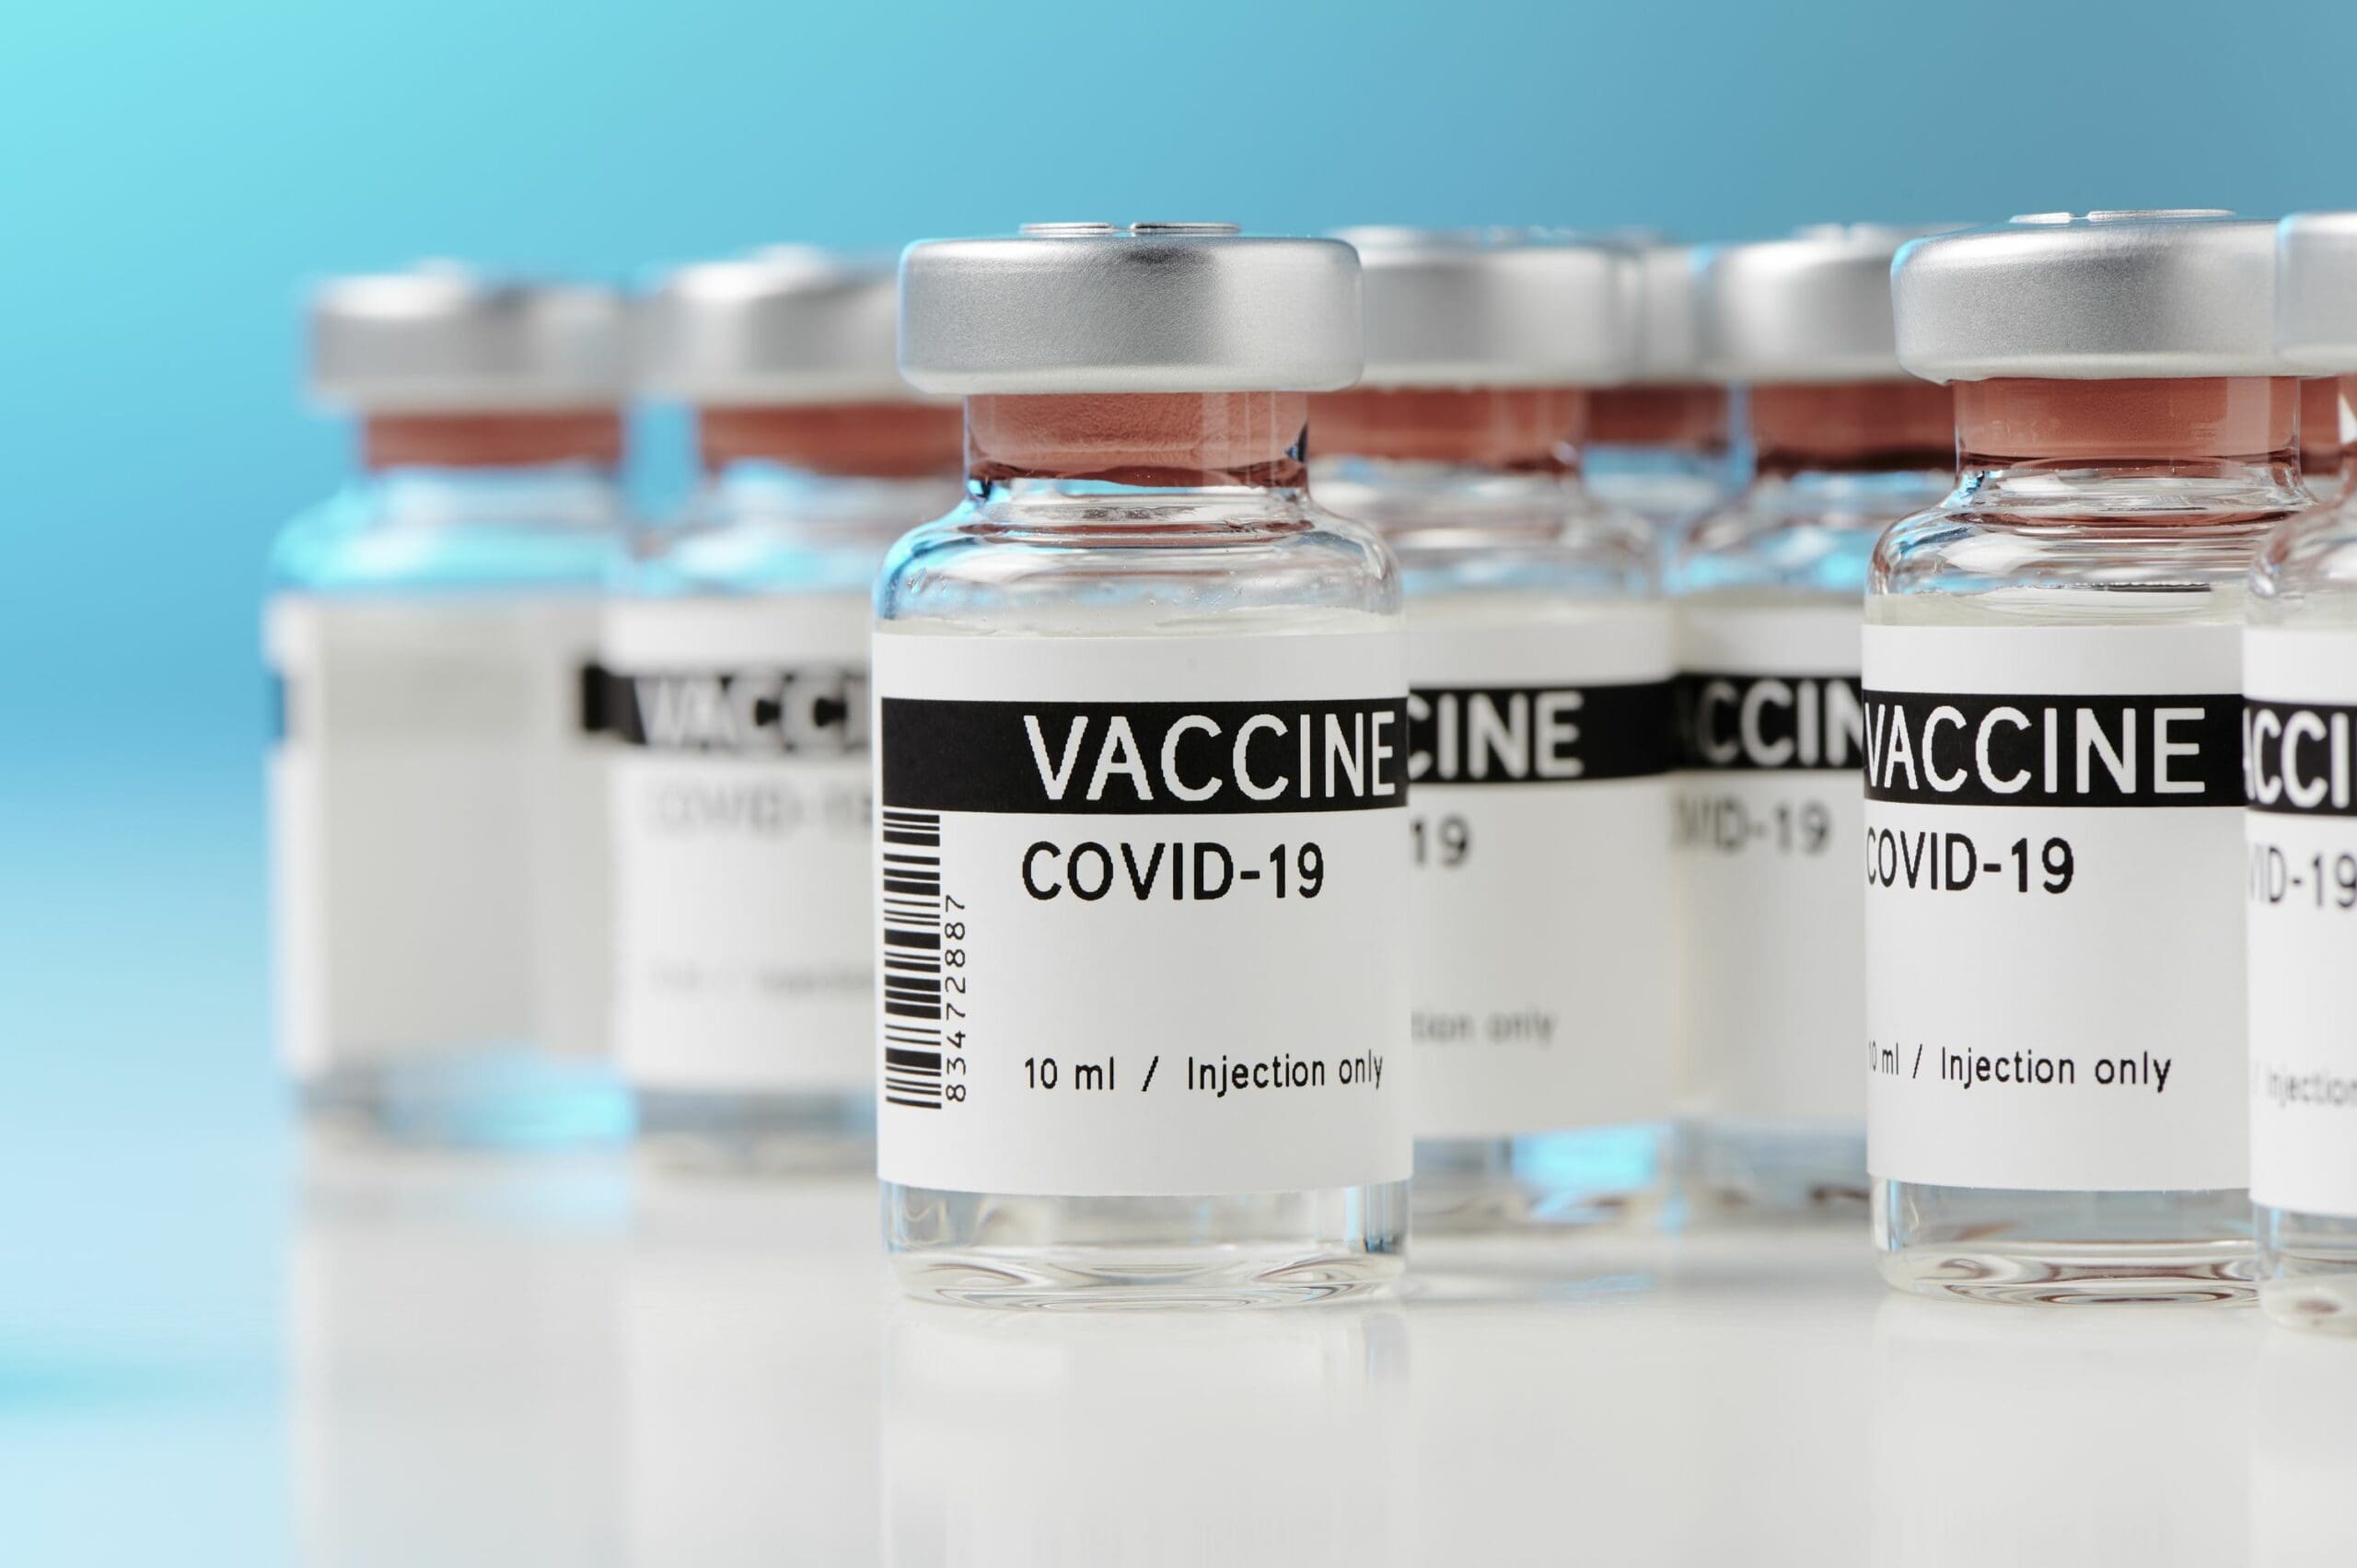 What do your patients really think about receiving the COVID-19 vaccine?